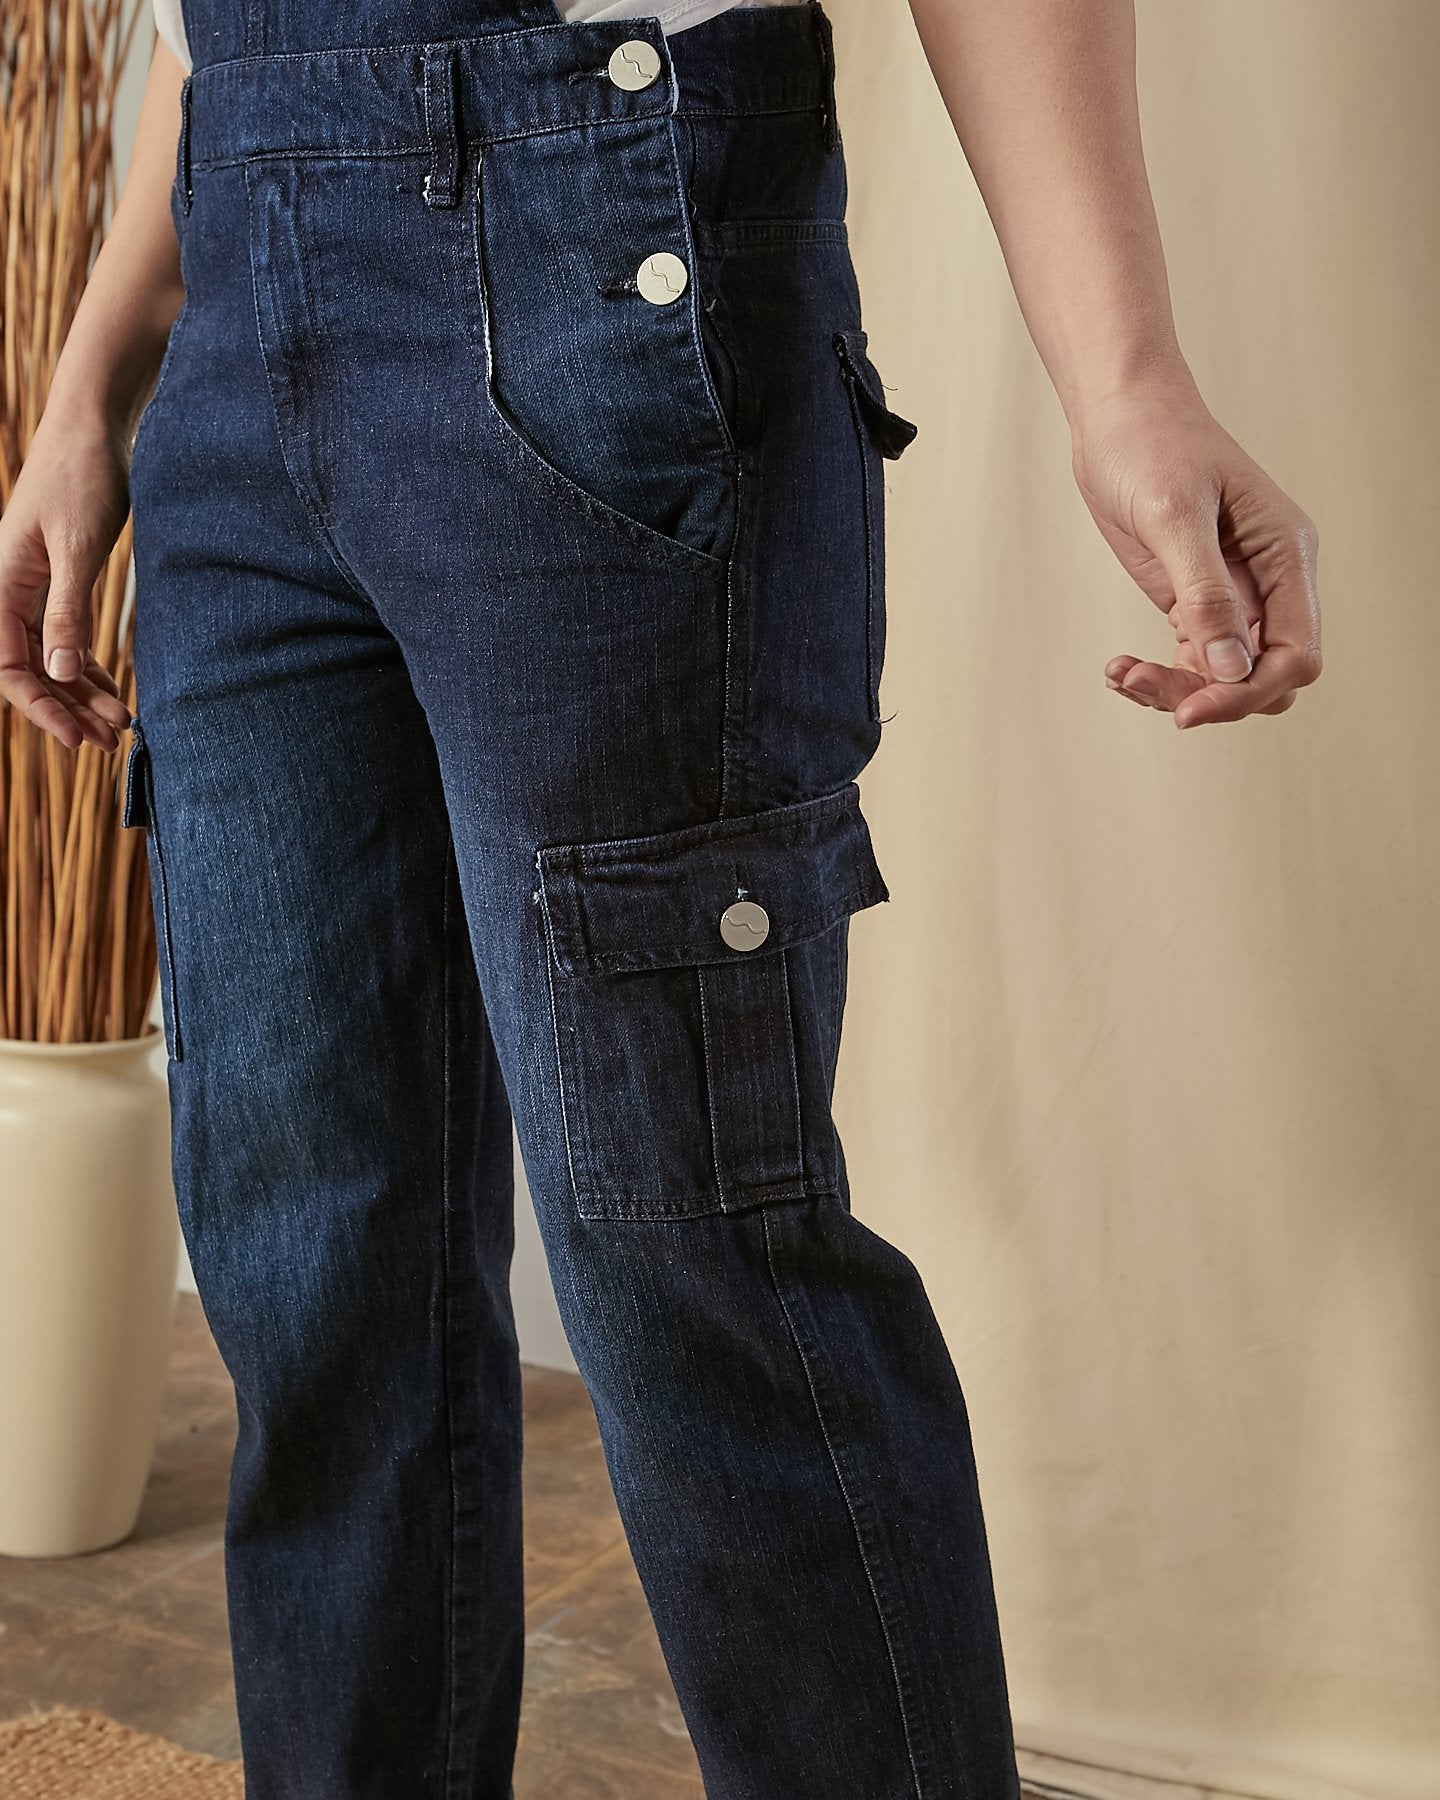 Close view of the leg of Tammy dark denim dungarees, clearly showing cargo pocket, side button fastening and denim texture.